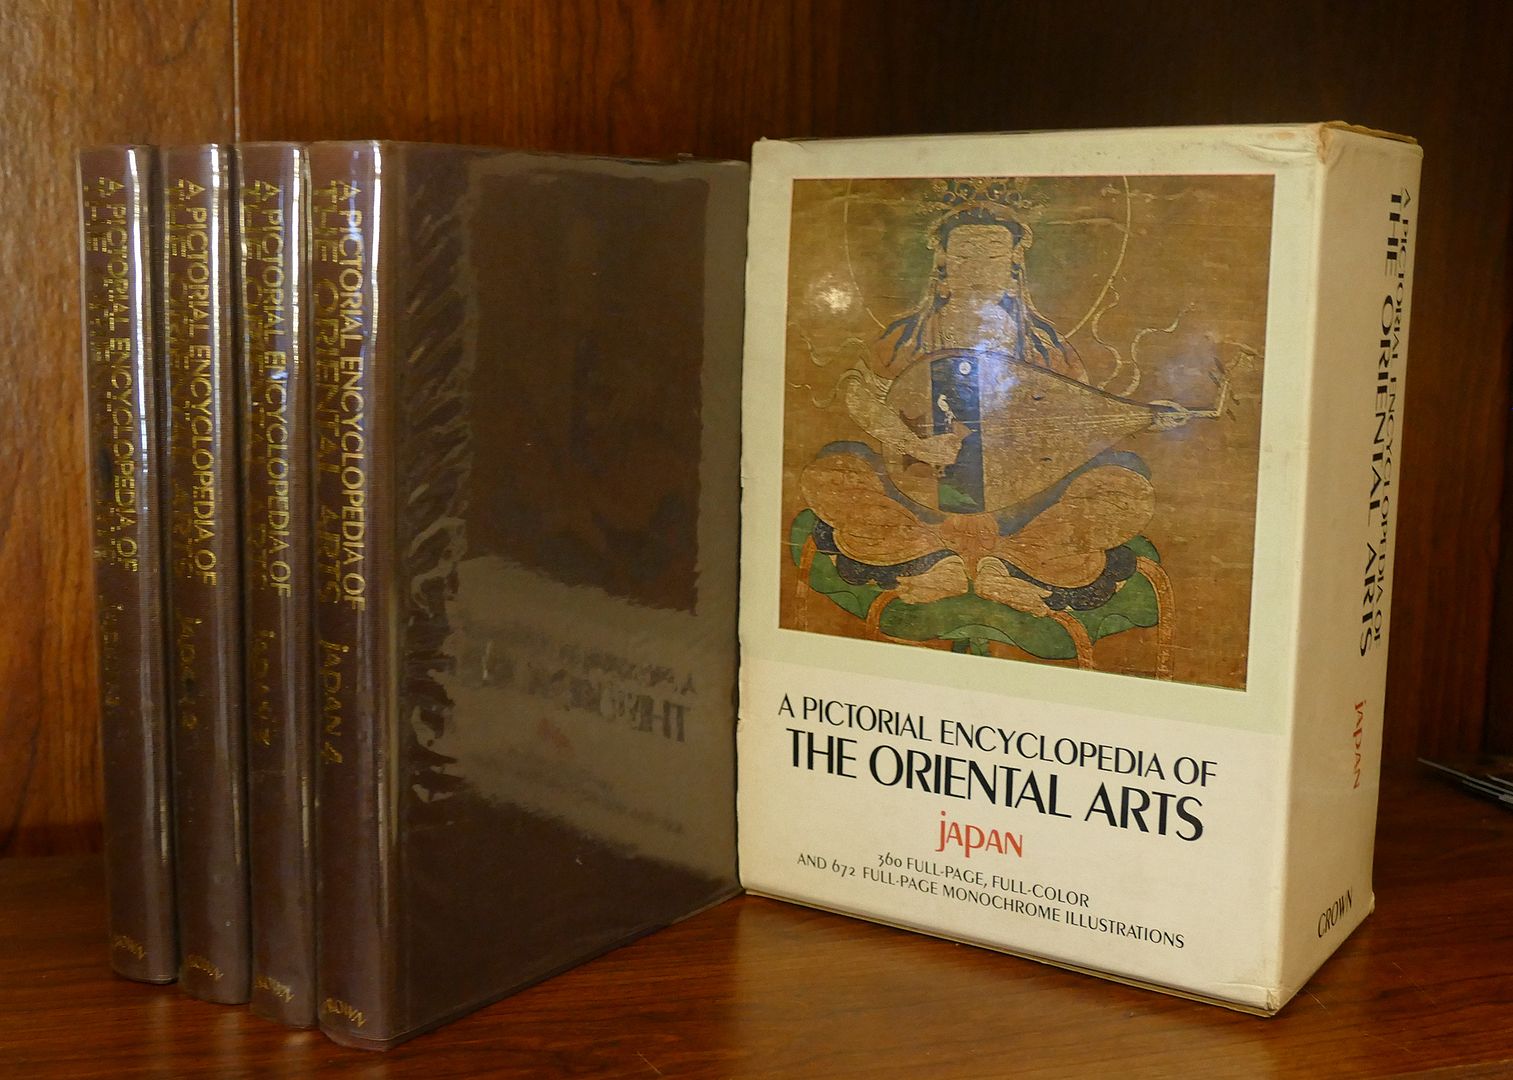  - A Pictorial Encyclopedia of the Oriental Arts : Japan